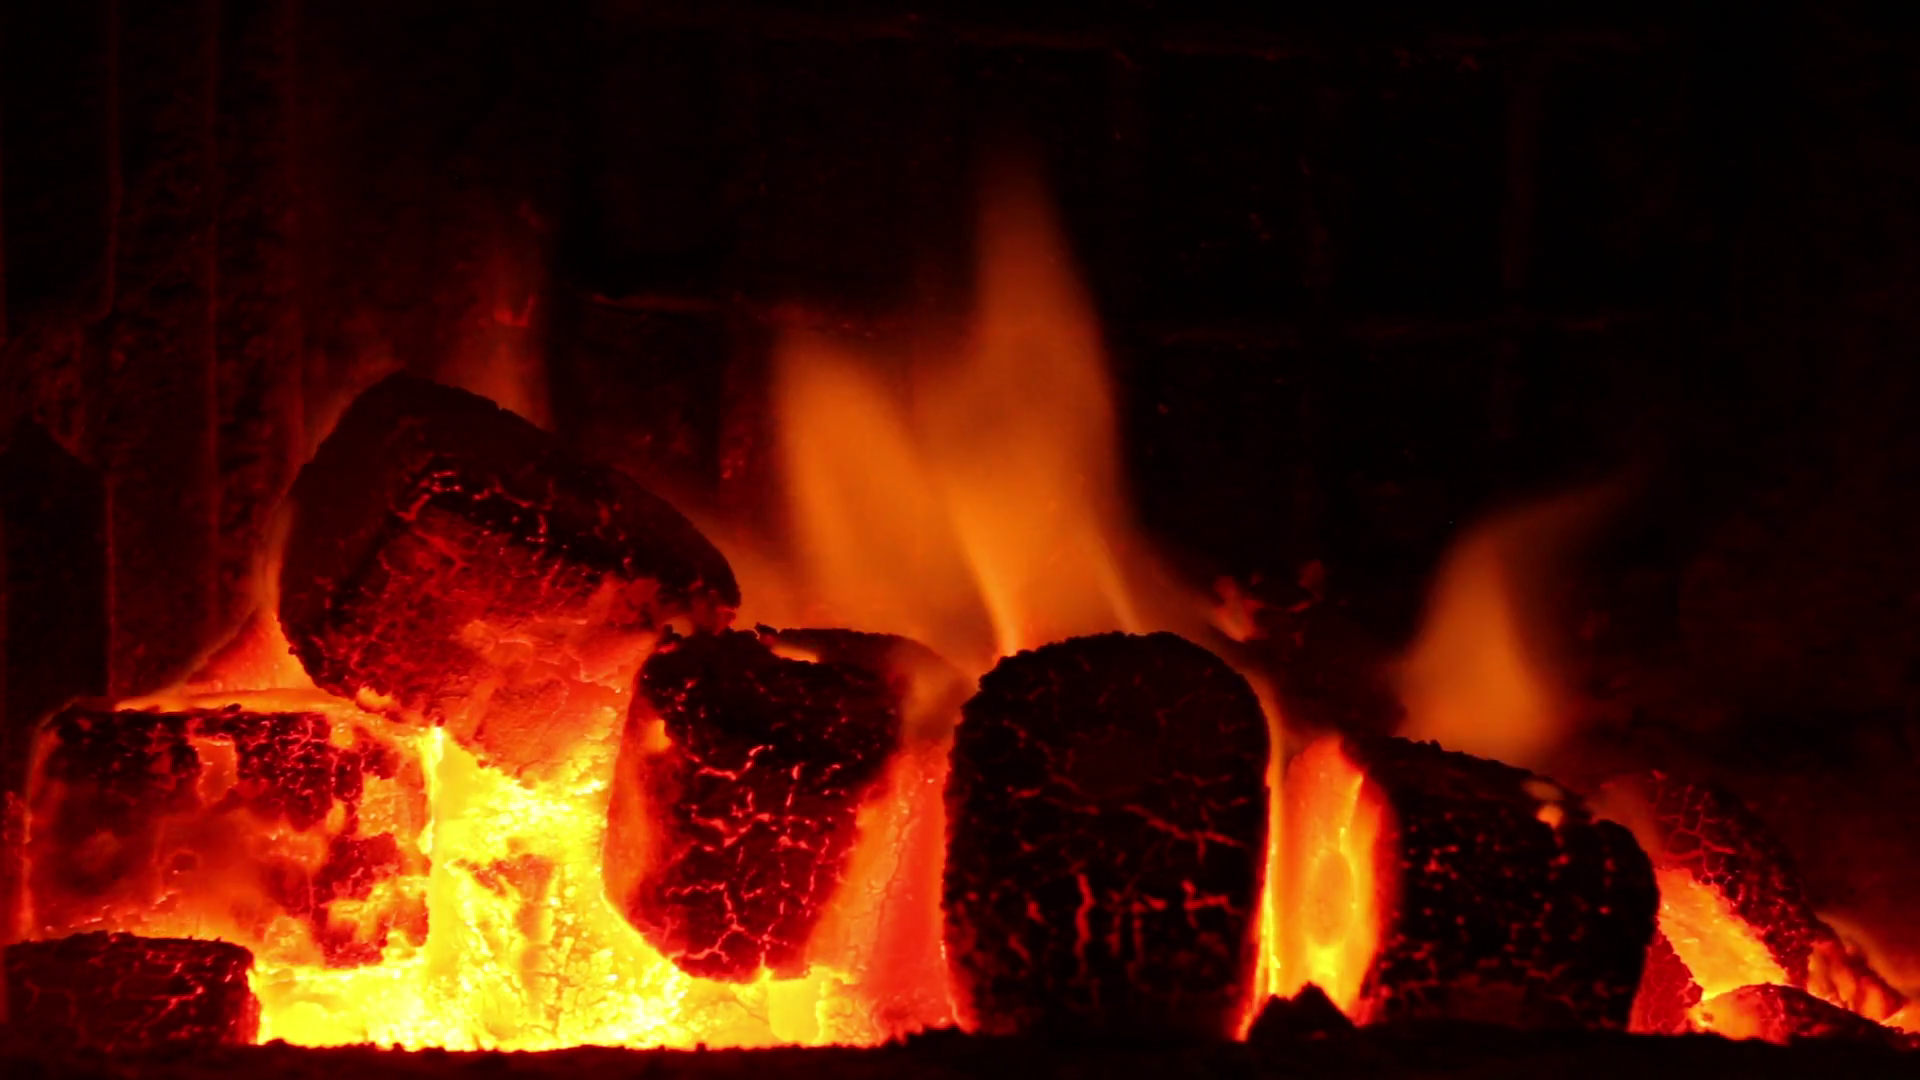 Burning Coal Png - Burning Coal In Furnace. Heating And Power Generation Theme. Industry And Co2 Emissions. Stock Video Footage   Videoblocks, Transparent background PNG HD thumbnail